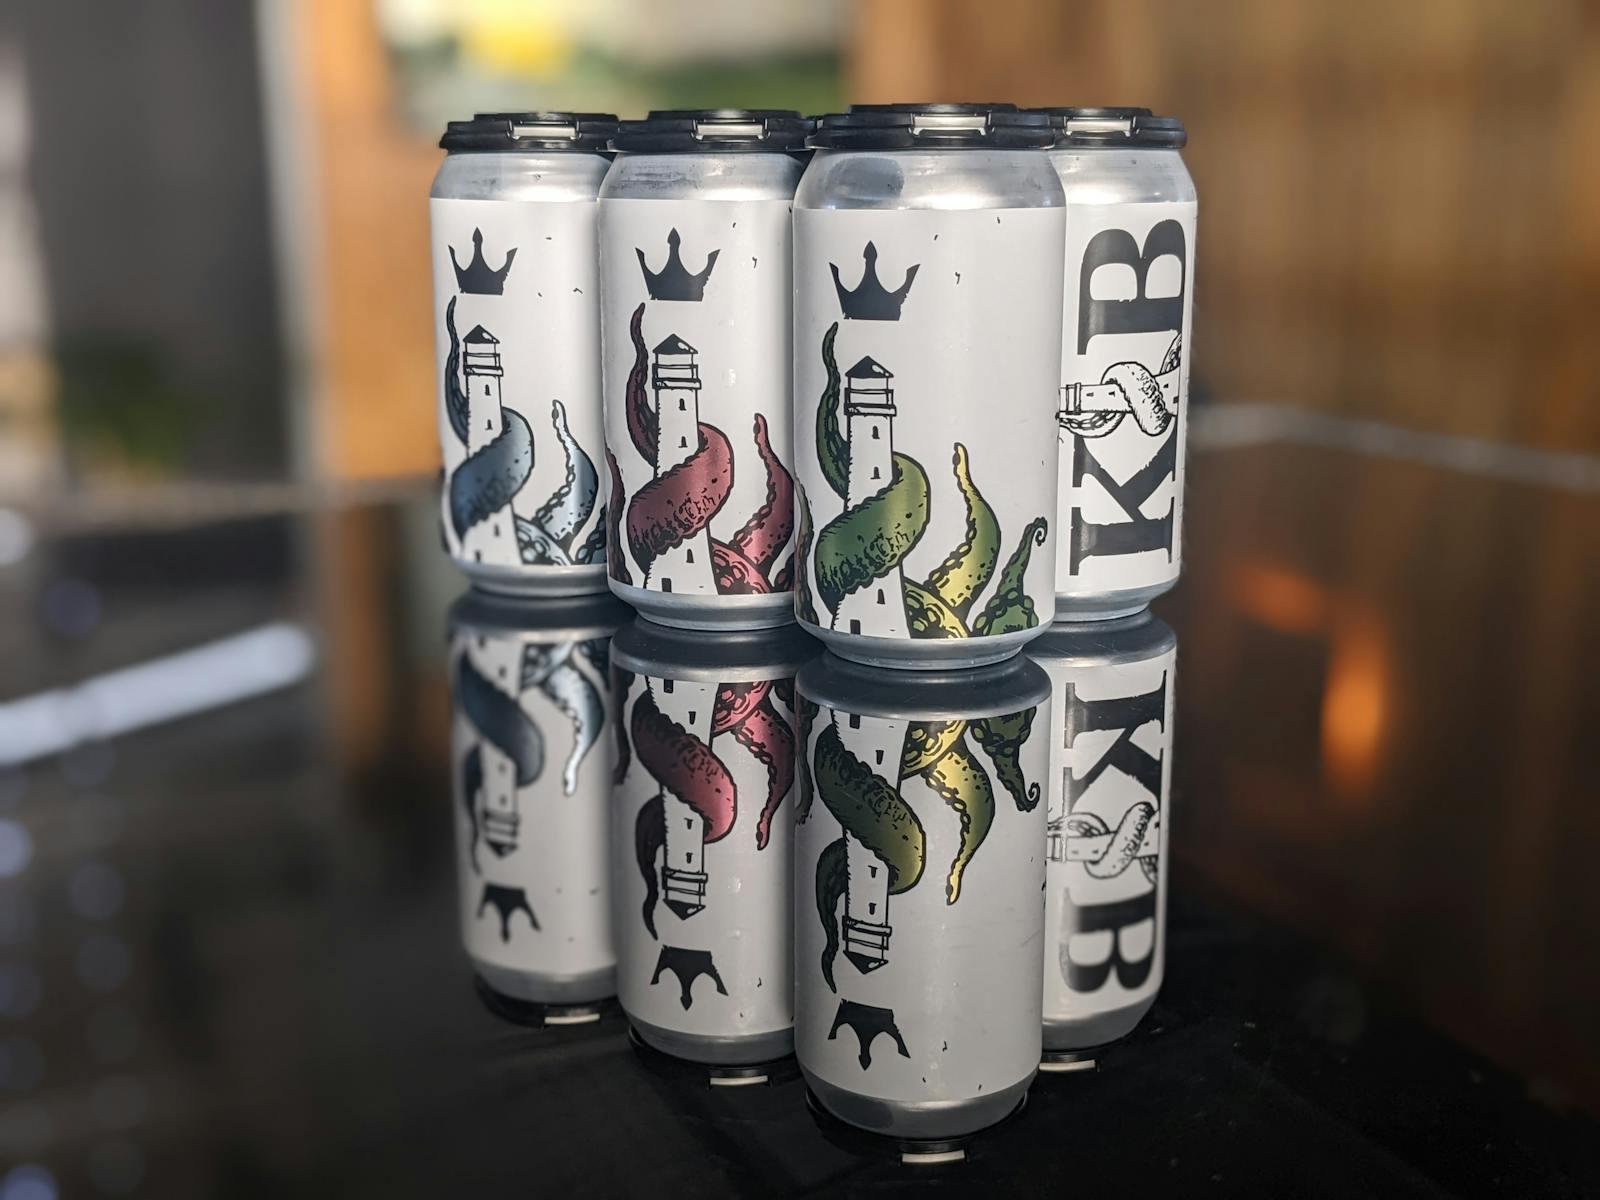 King Island Brewhouse Cans - 6 pack